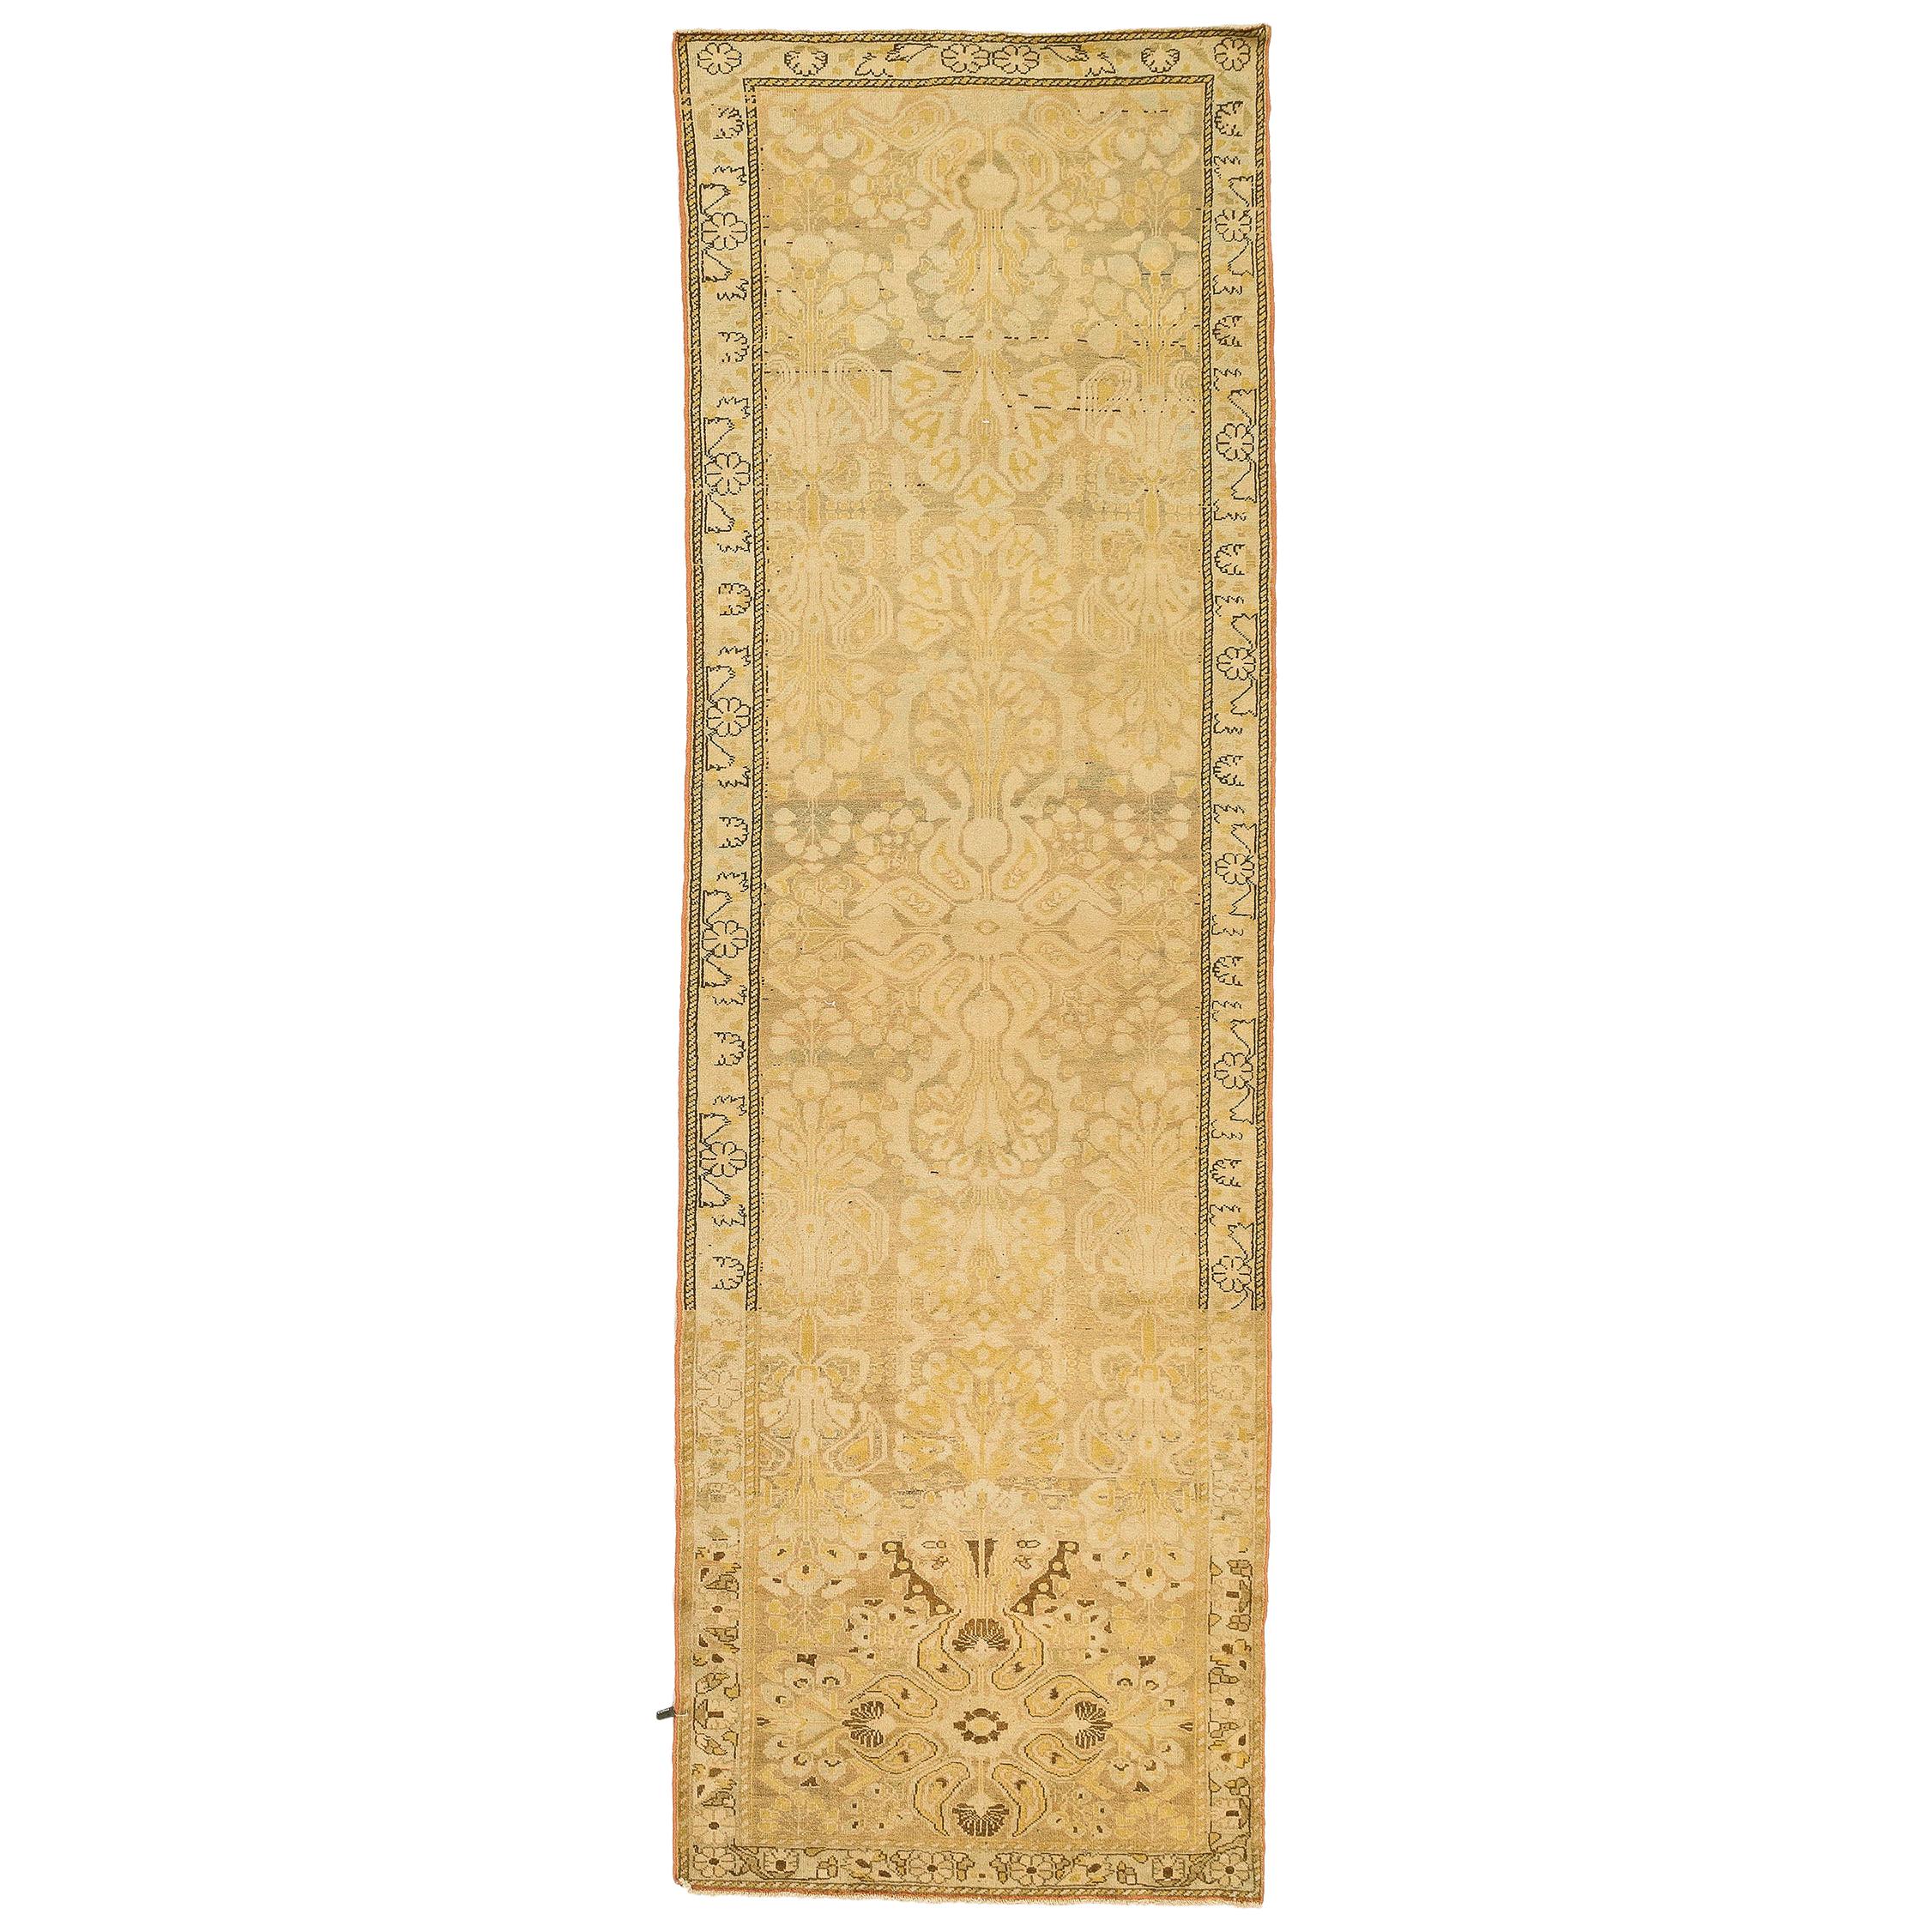 Antique Persian Bakhtiar Runner Rug with Brown and Ivory Botanical Details